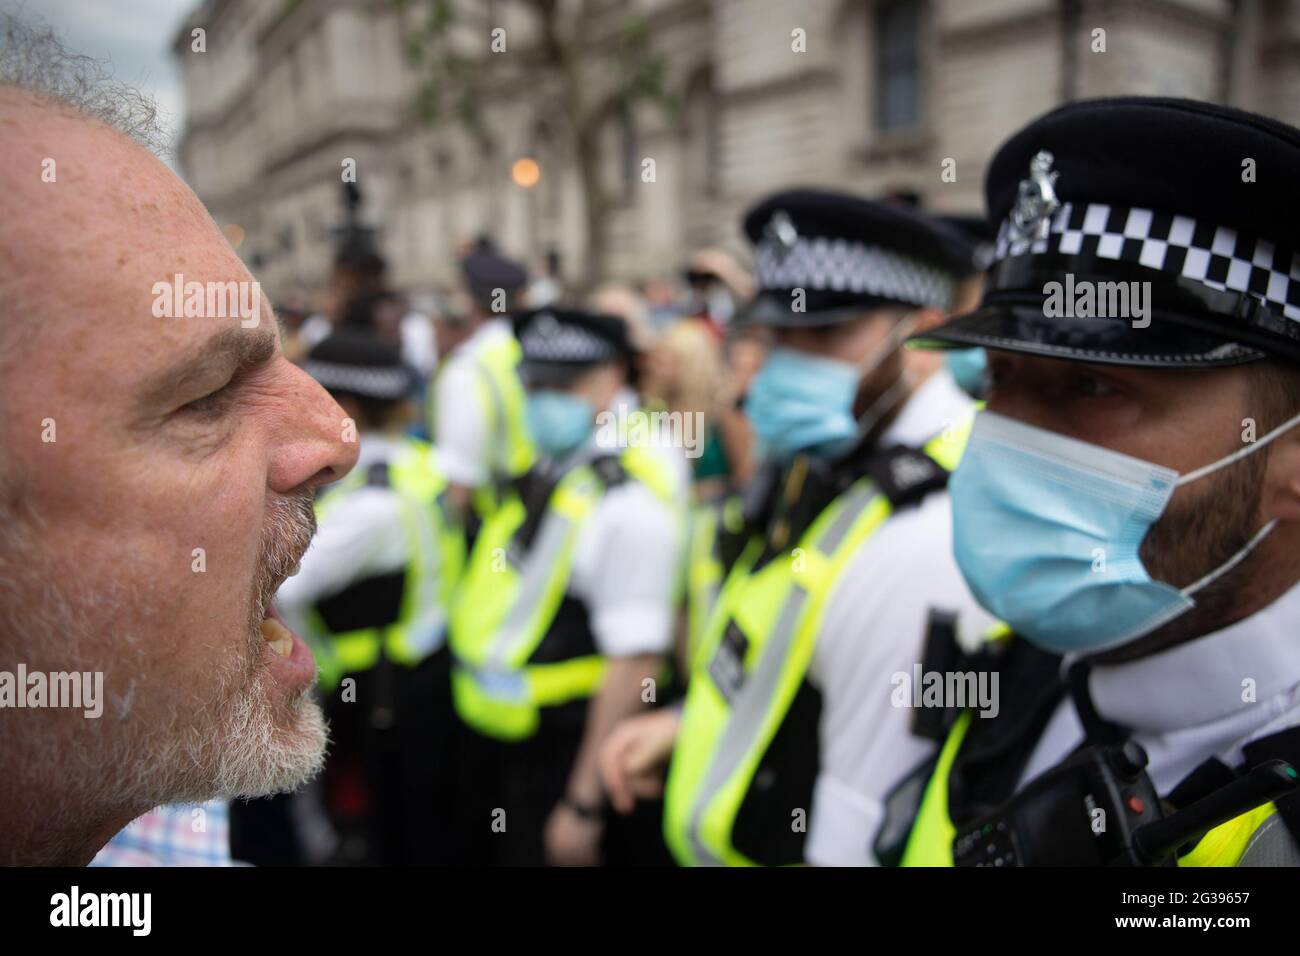 London, UK. 14th June 2021. Anti-vaxx protester confronts police officer outside Parliament. Yuen Ching Ng/Alamy Live News Yuen Ching Ng/Alamy Live News Stock Photo